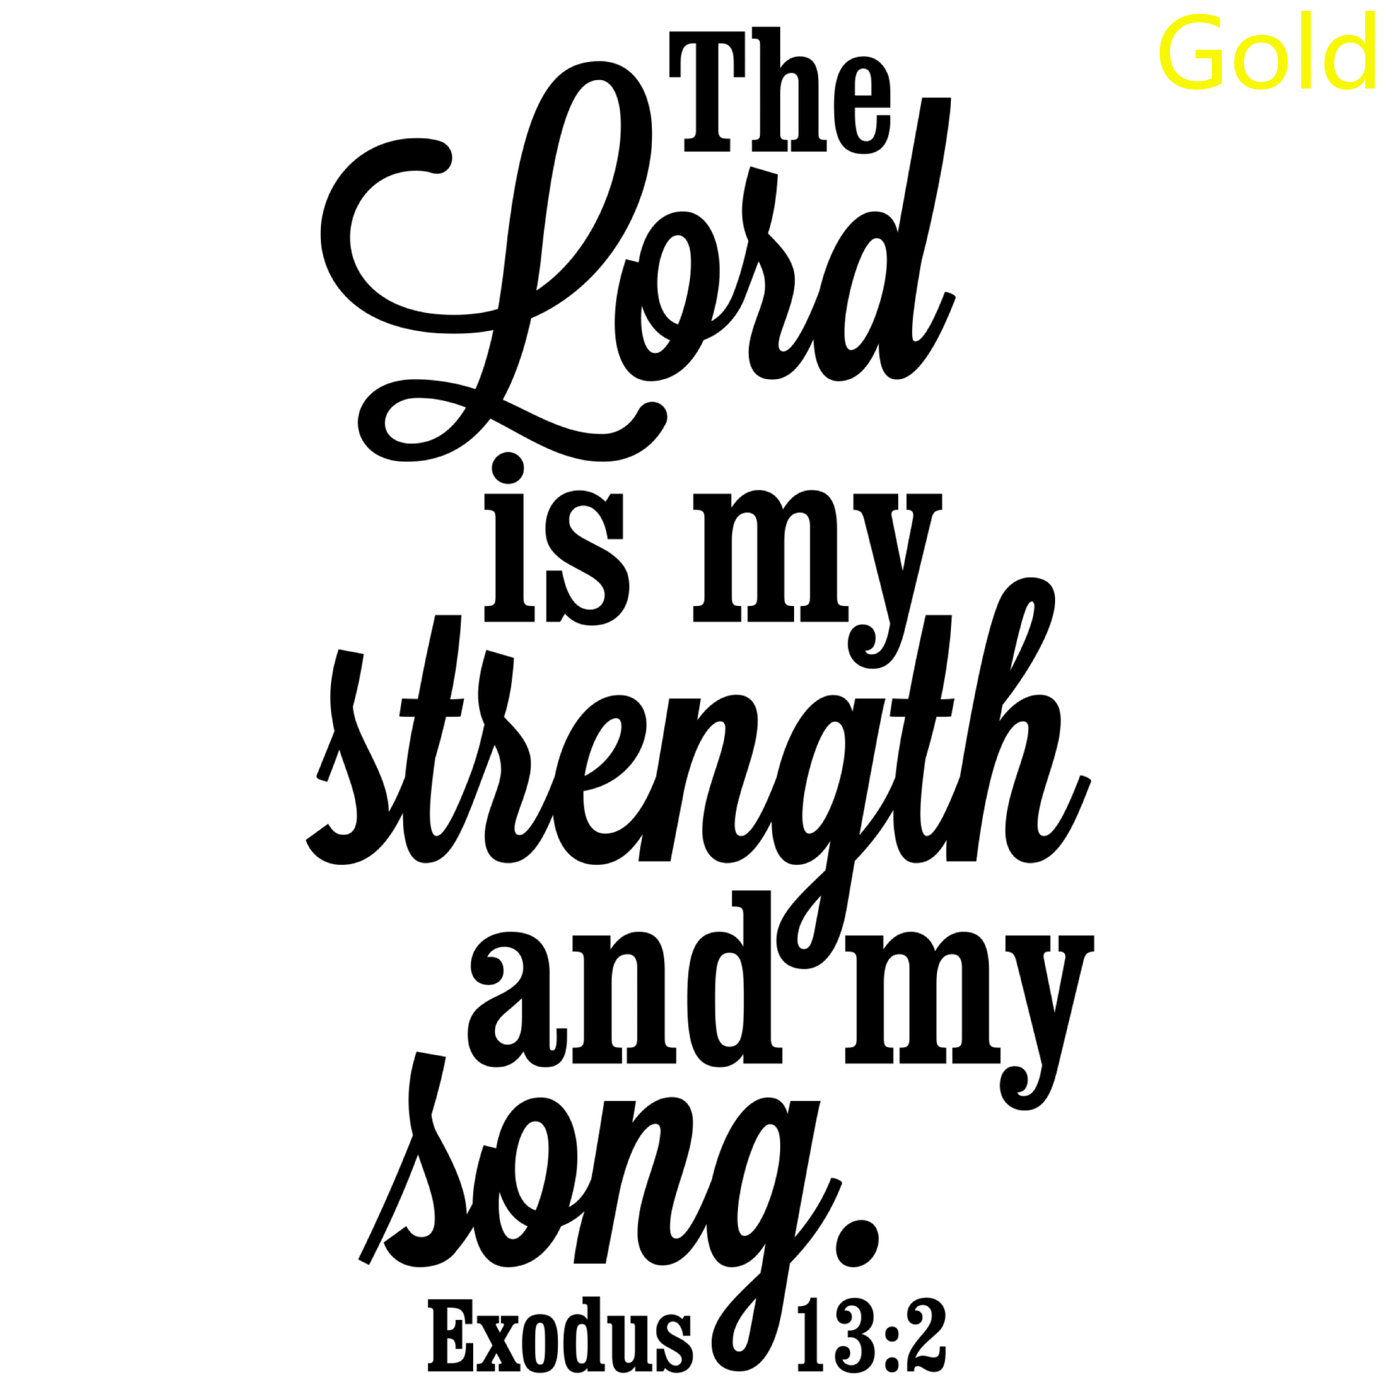 The Lord Is My Strength And My Song Christian Decal